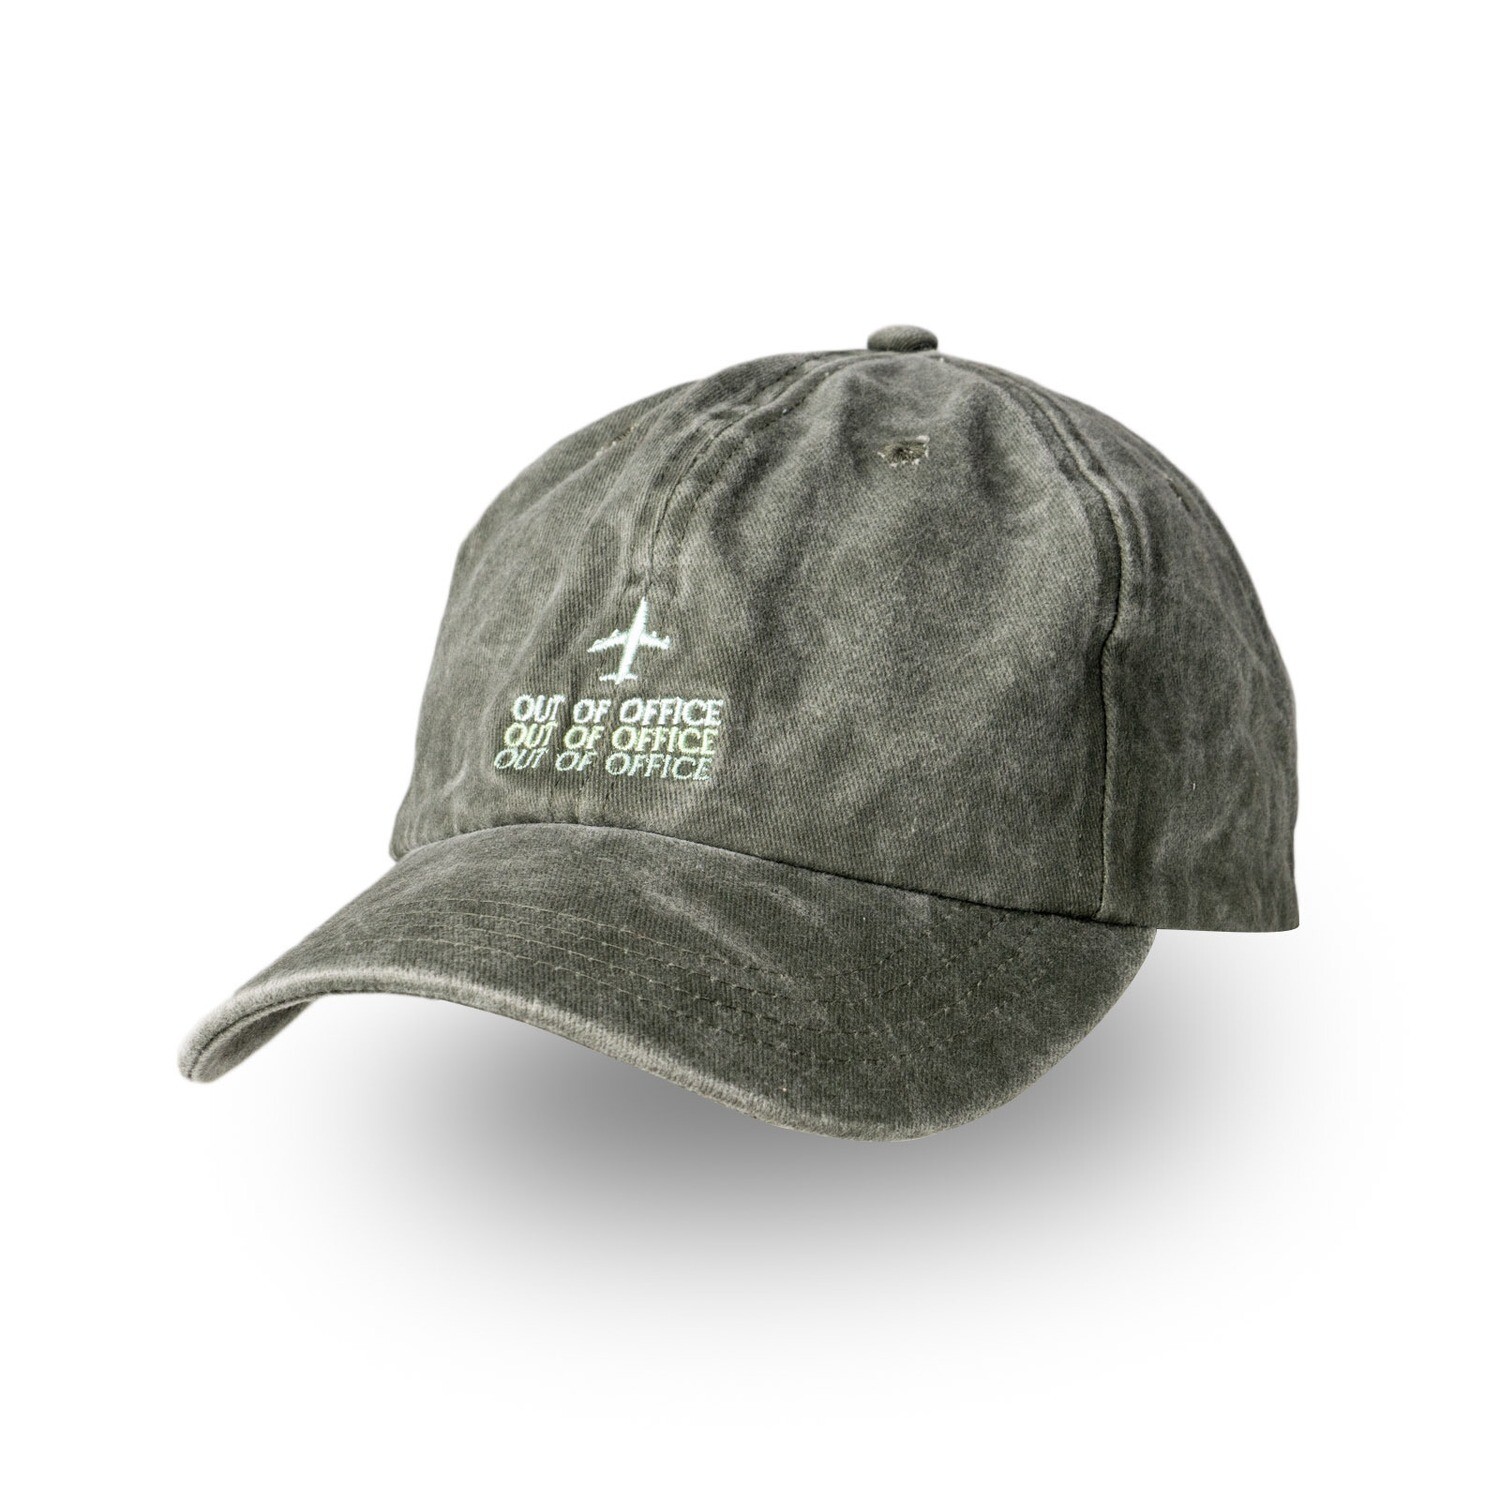 Out of Office Classic Hat